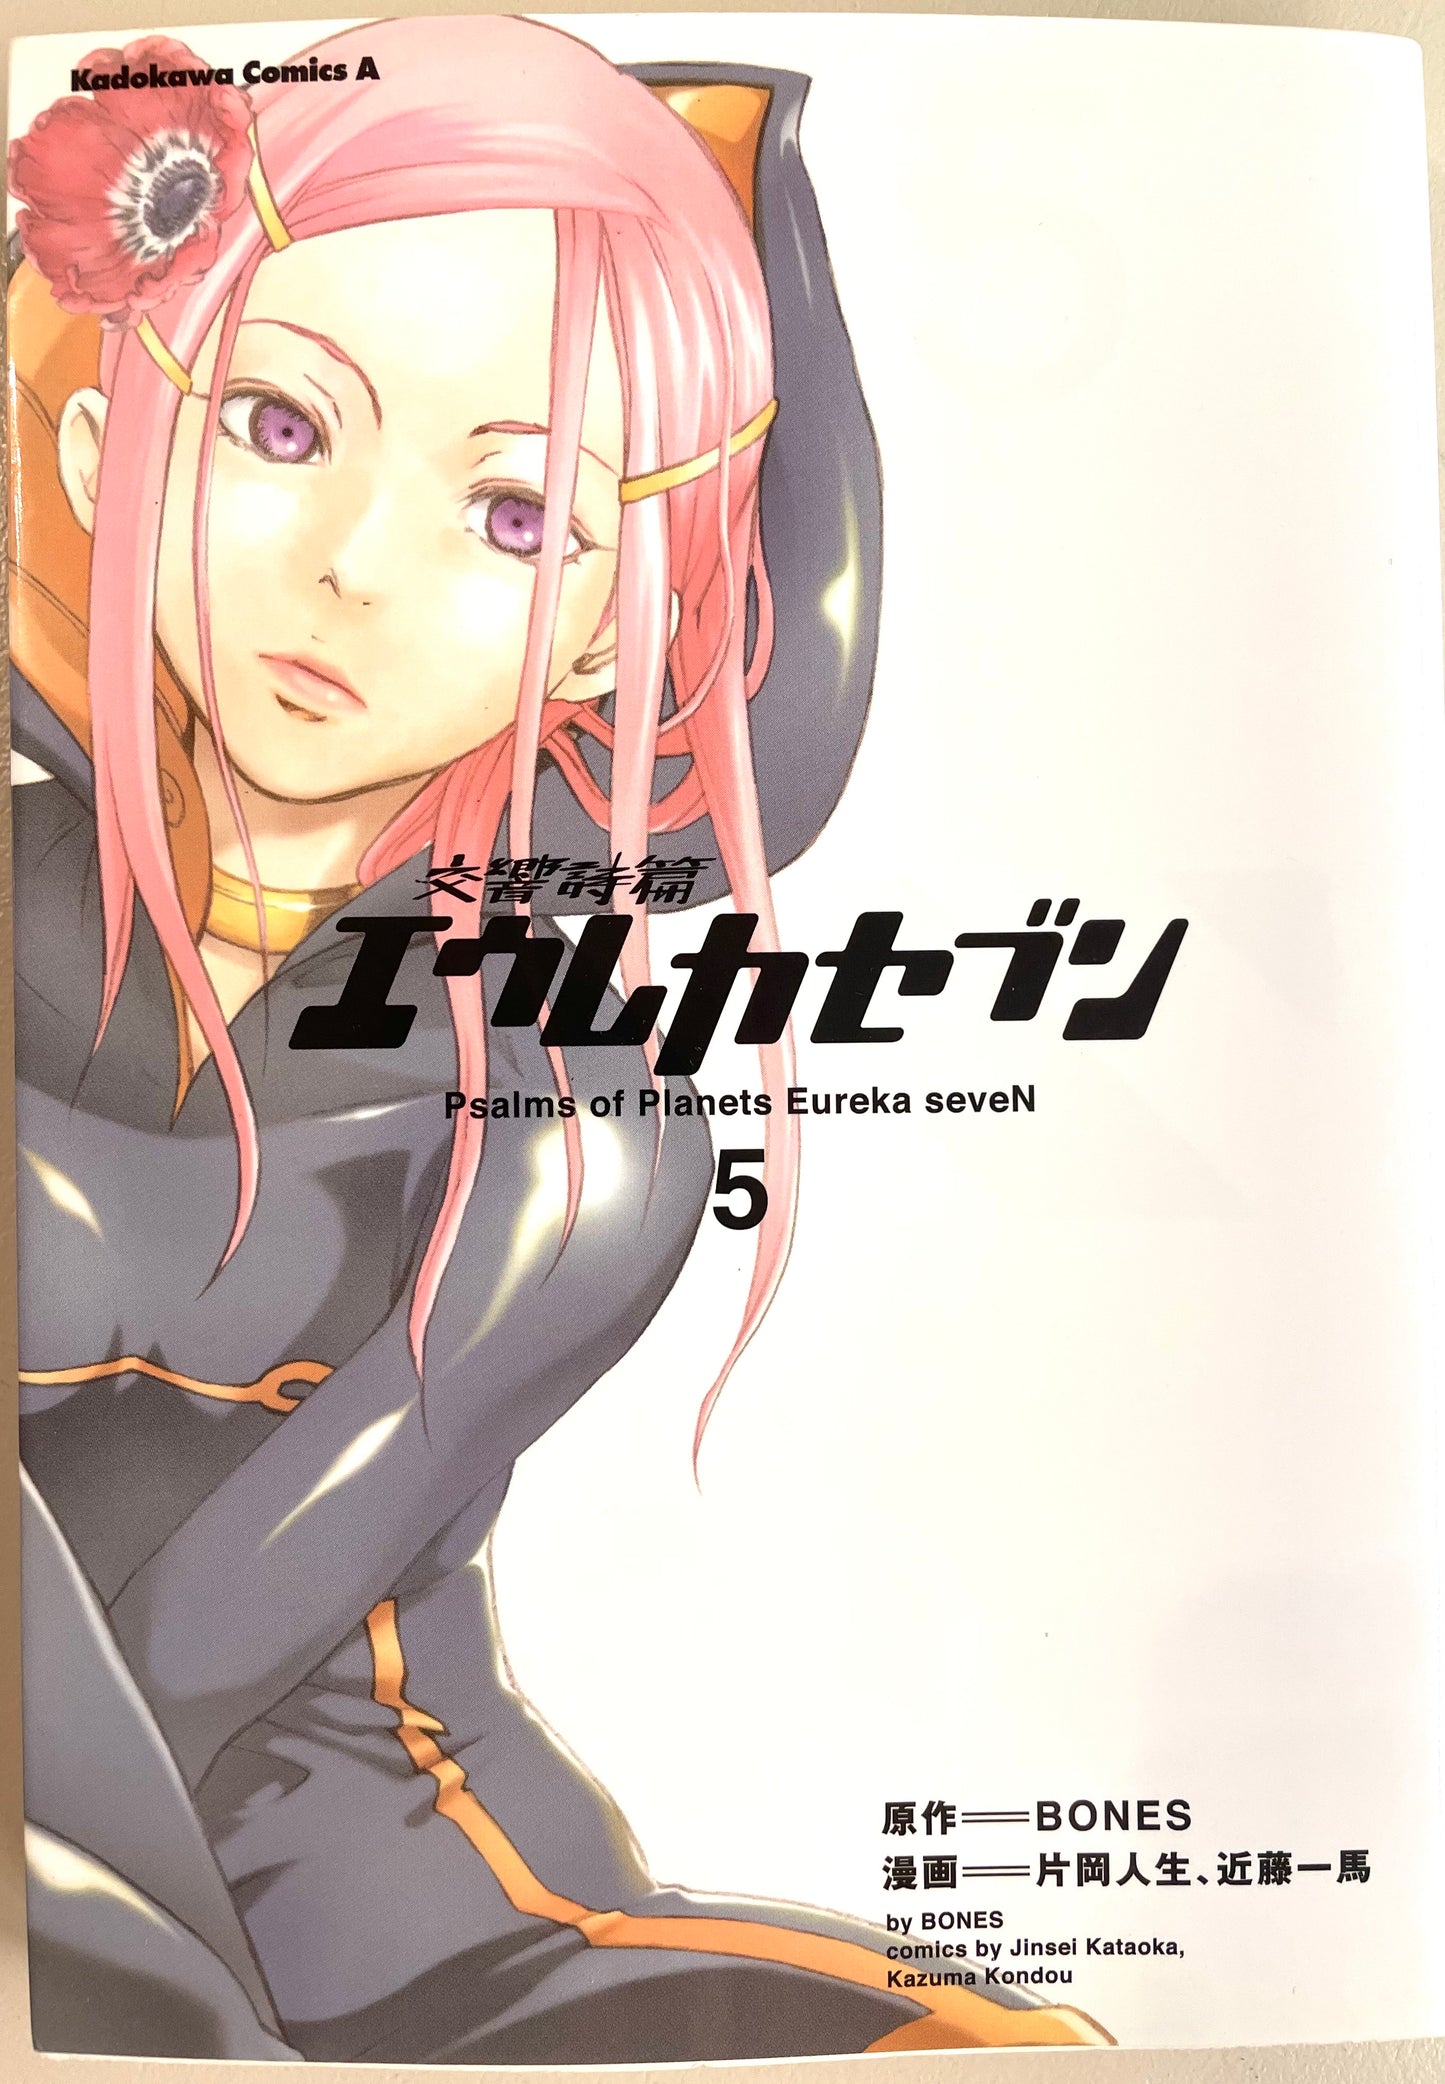 Psalms of Planets Eureka seveN Vol.5-Official Japanese Edition